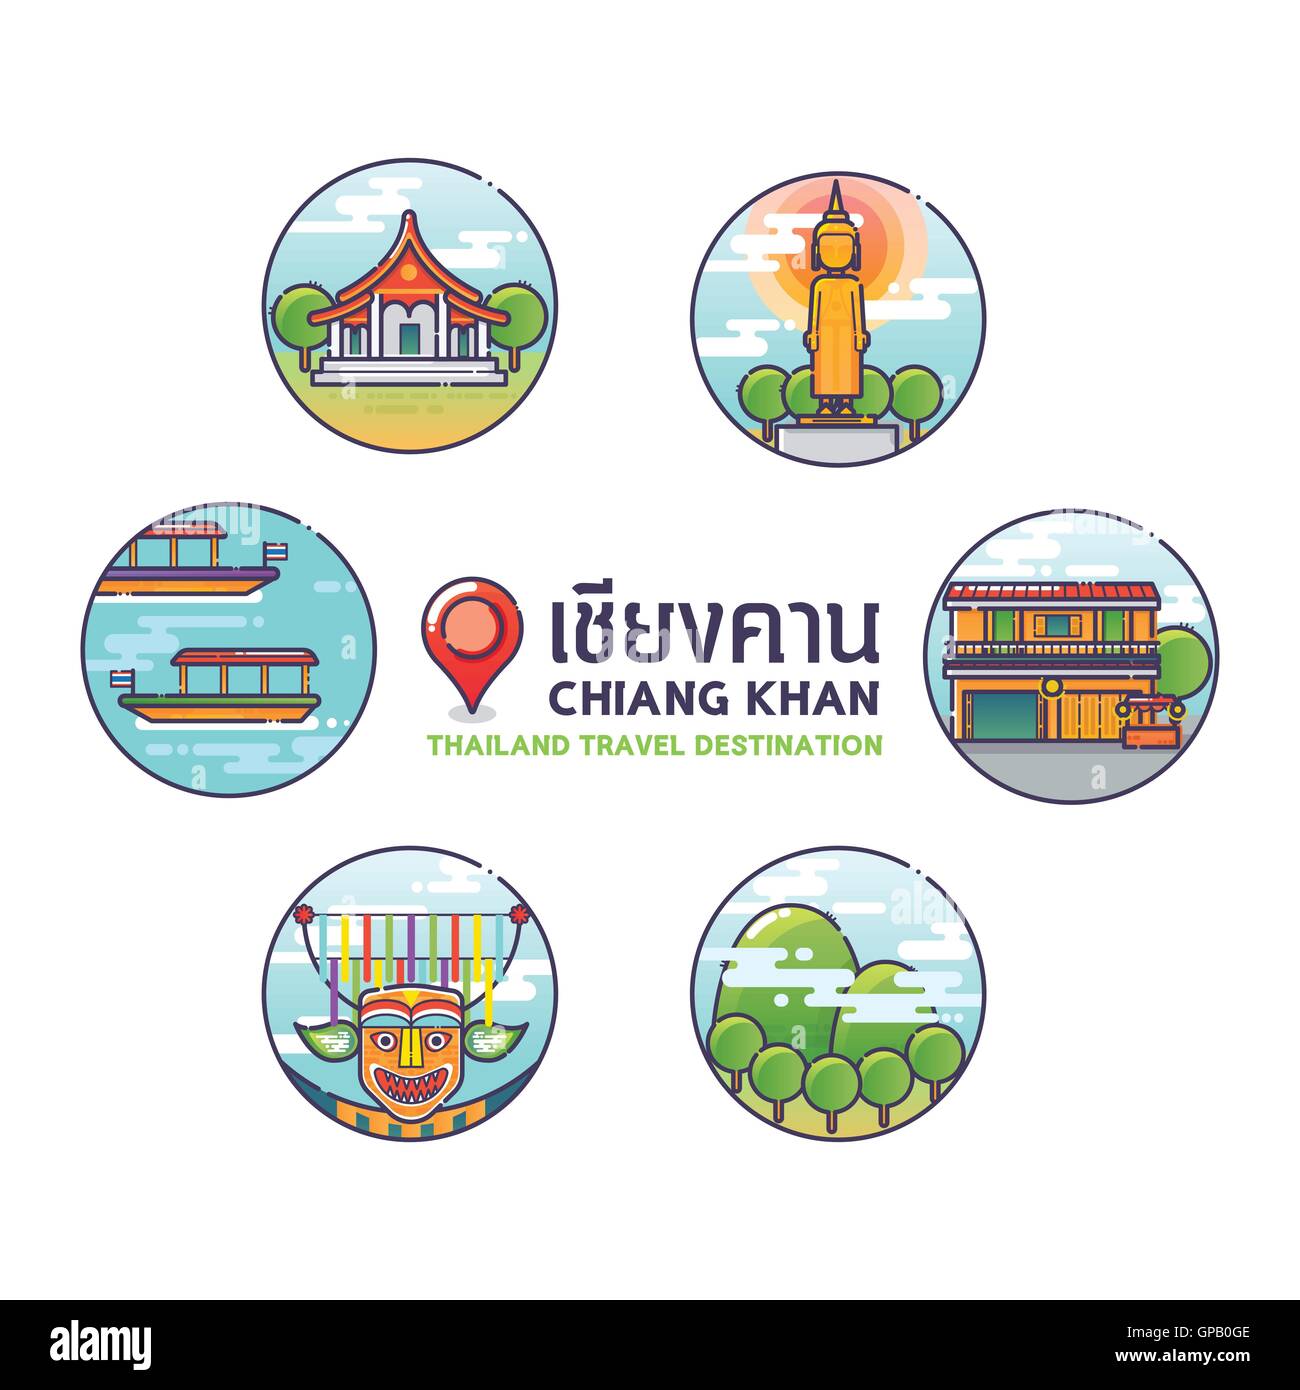 Vector Illustration of Chiang Khan Colorful Icons,Thailand Travel Destination Concept.Trendy Linear Style. Stock Vector